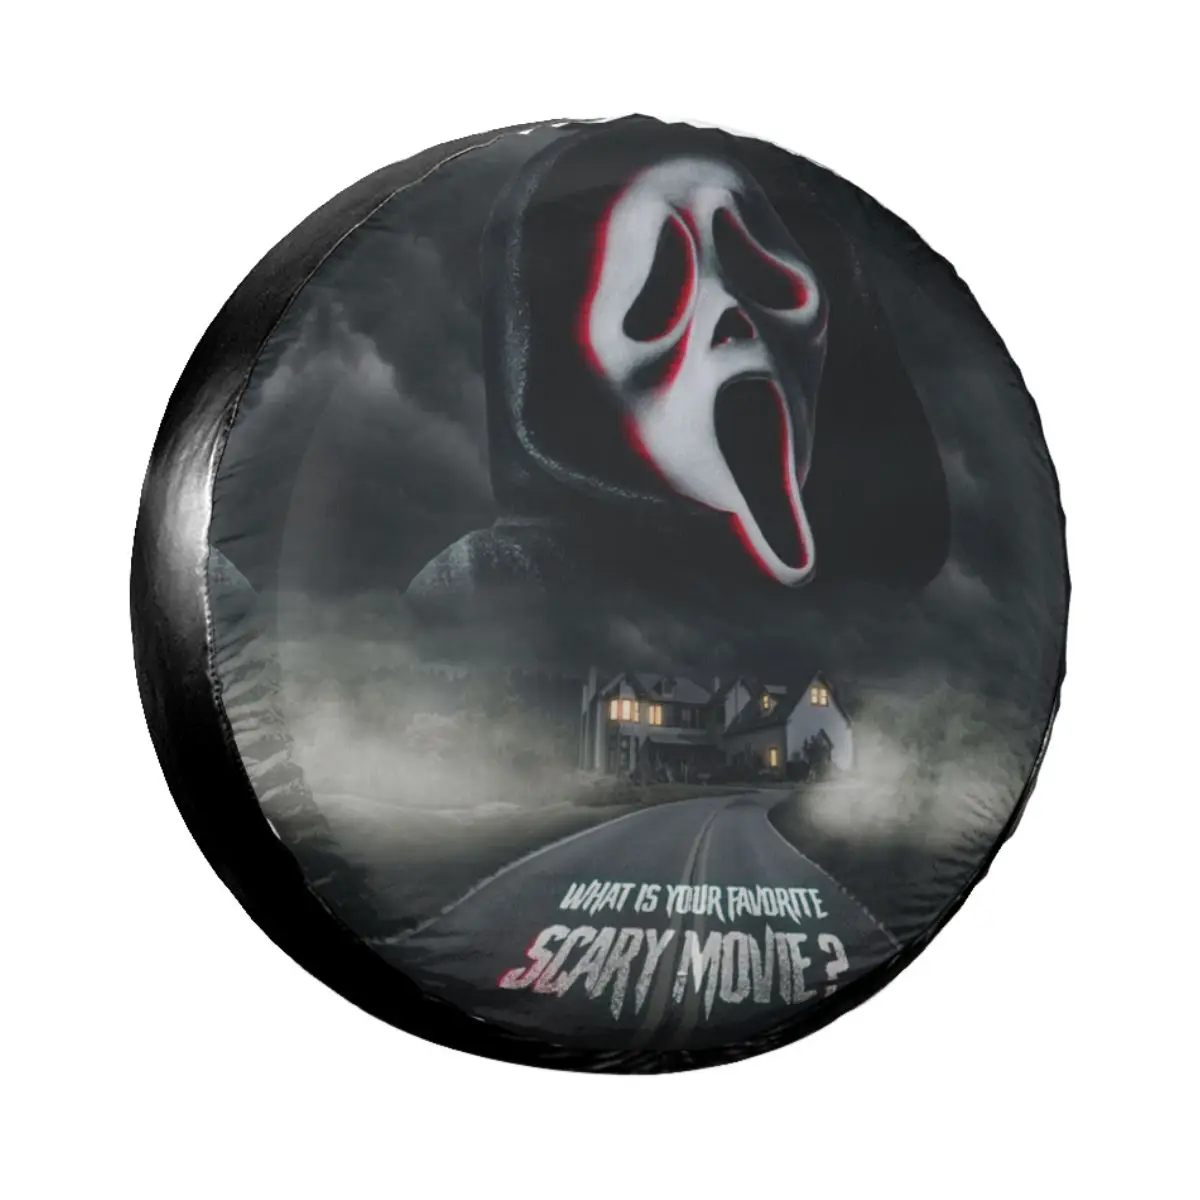 Killer Scream Spare Tire Cover Bag Pouch for Mitsubishi Pajero Halloween  Horror Movie Ghost Car Wheel Covers AliExpress